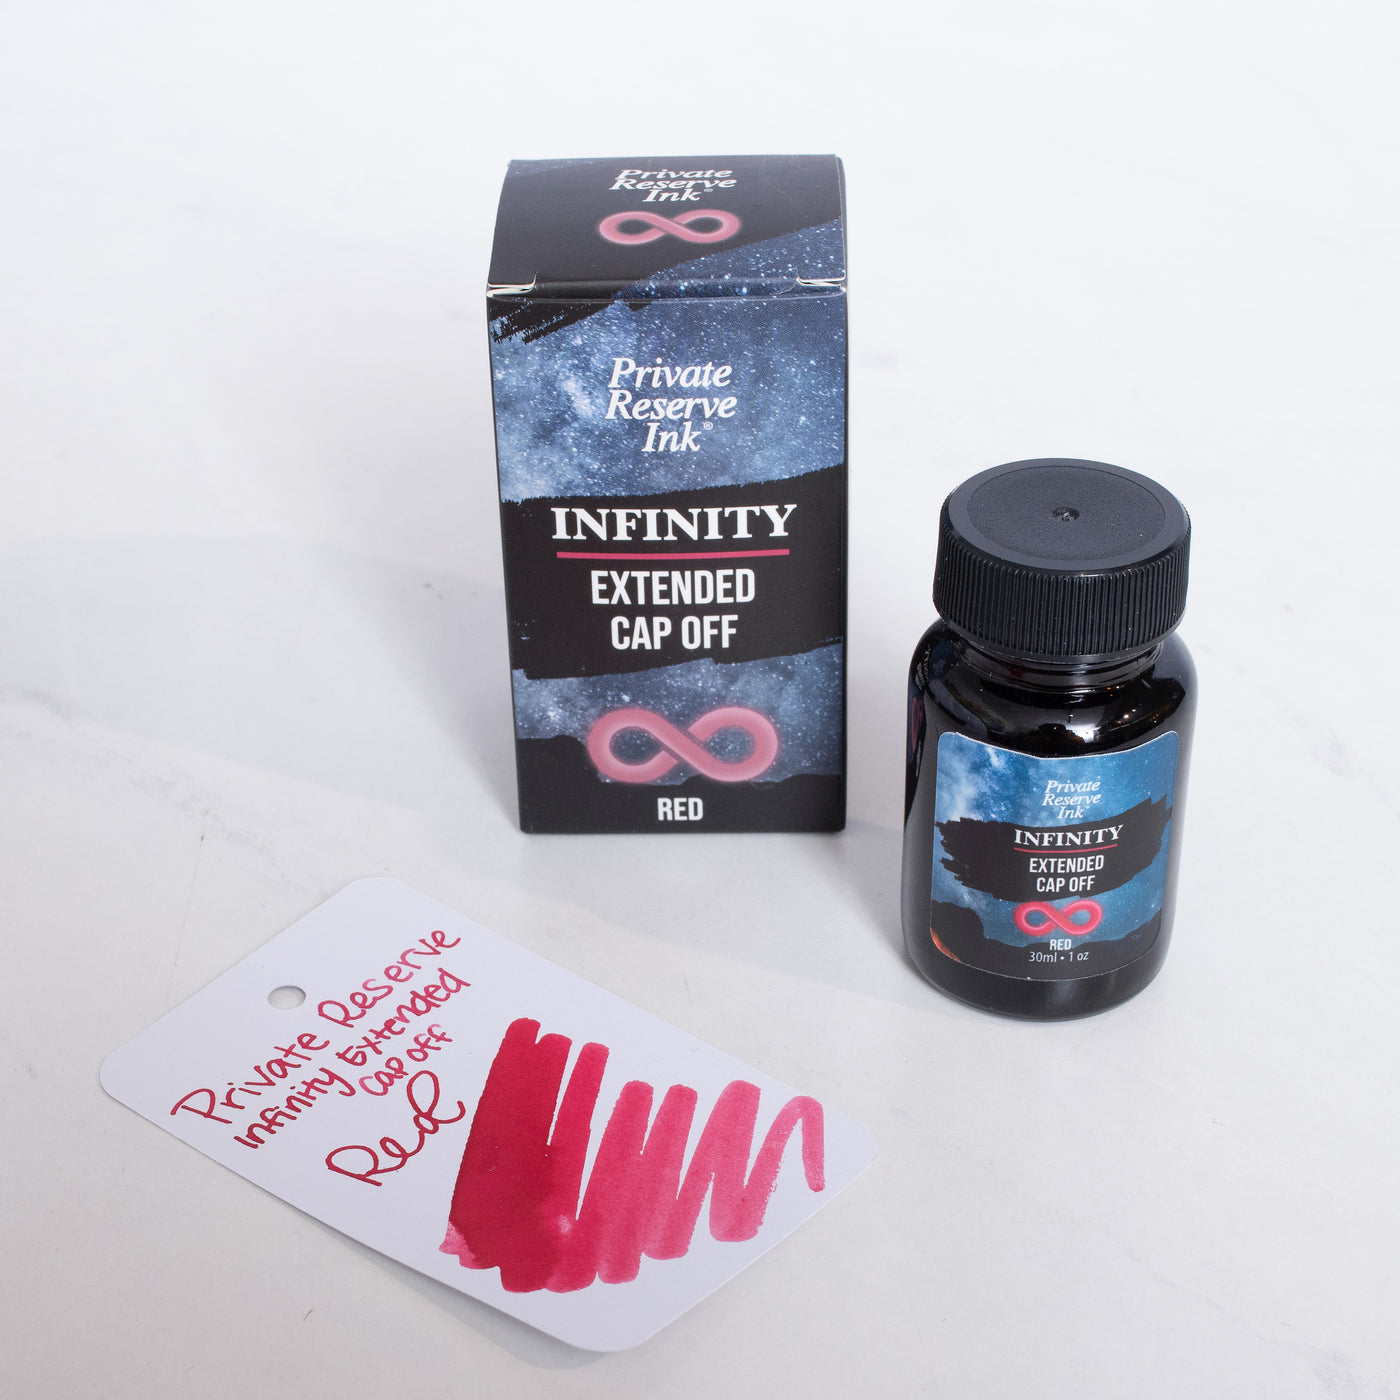 Private Reserve Infinity Extended Cap Off Red Ink Bottle